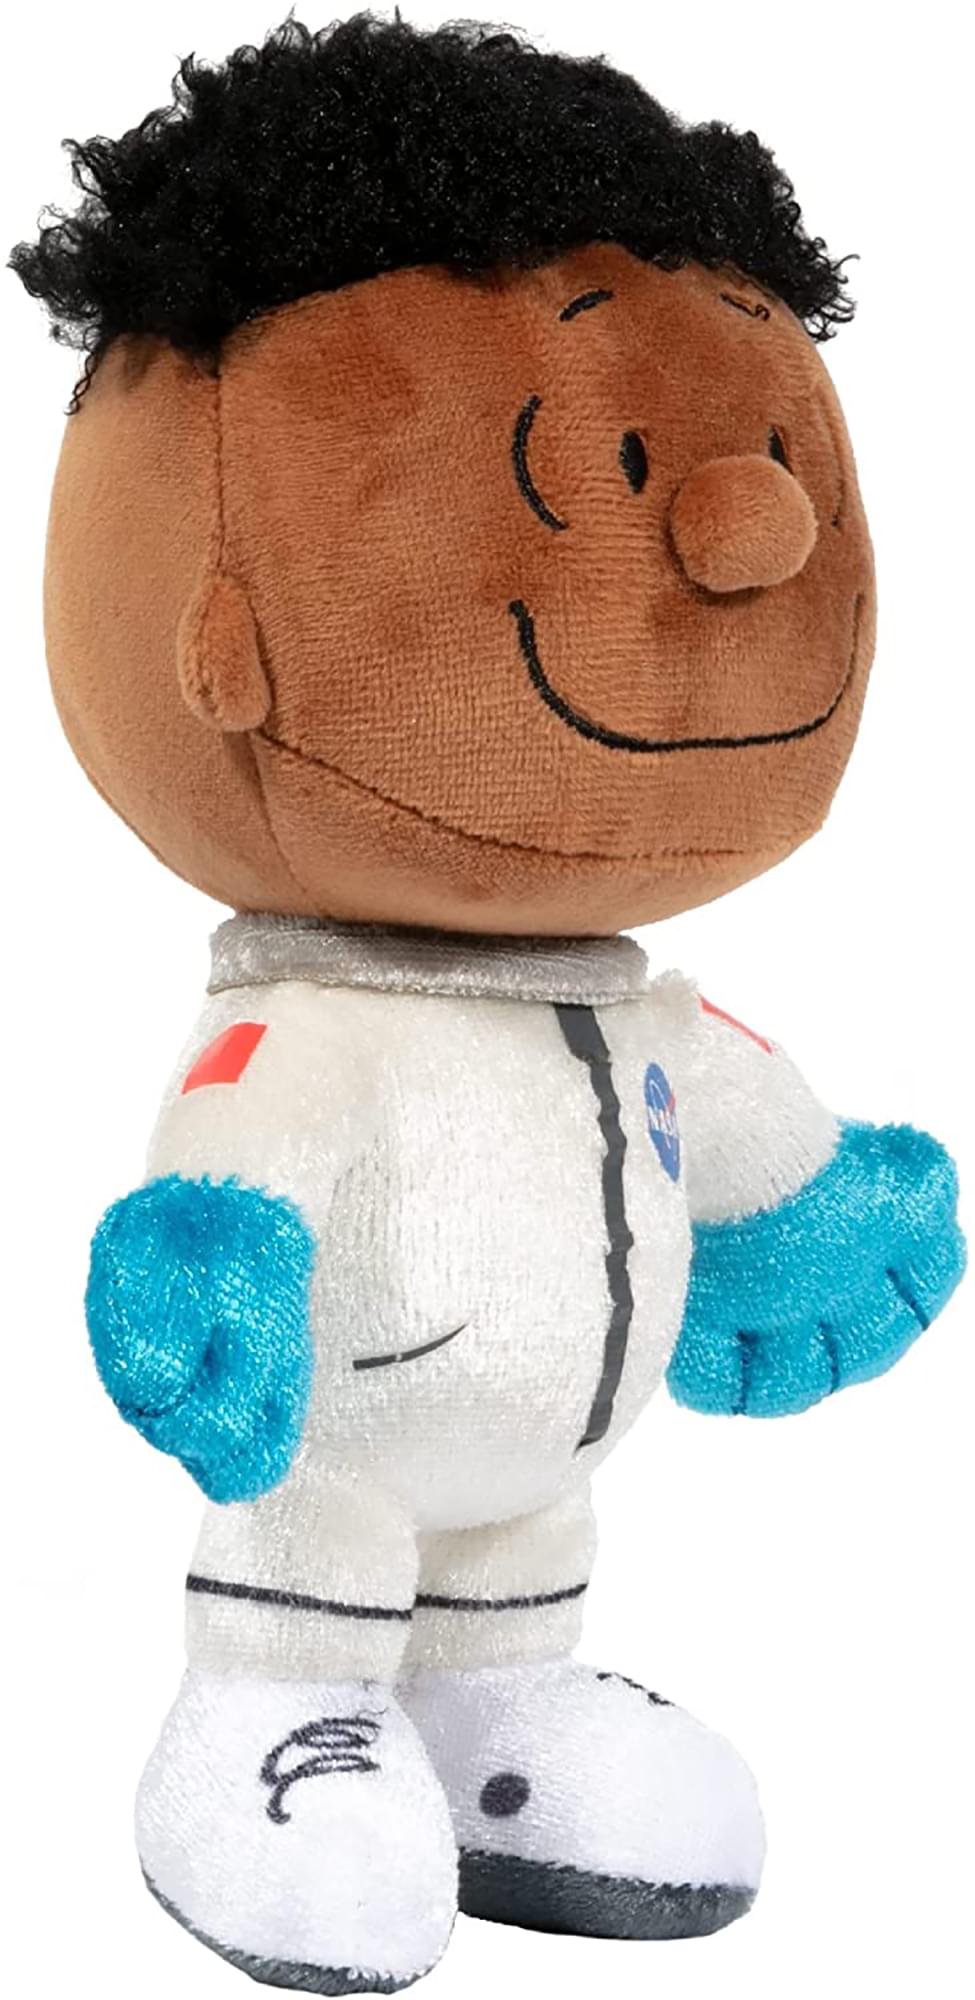 Snoopy in Space 7.5 Inch Plush | Franklin in White NASA Suit